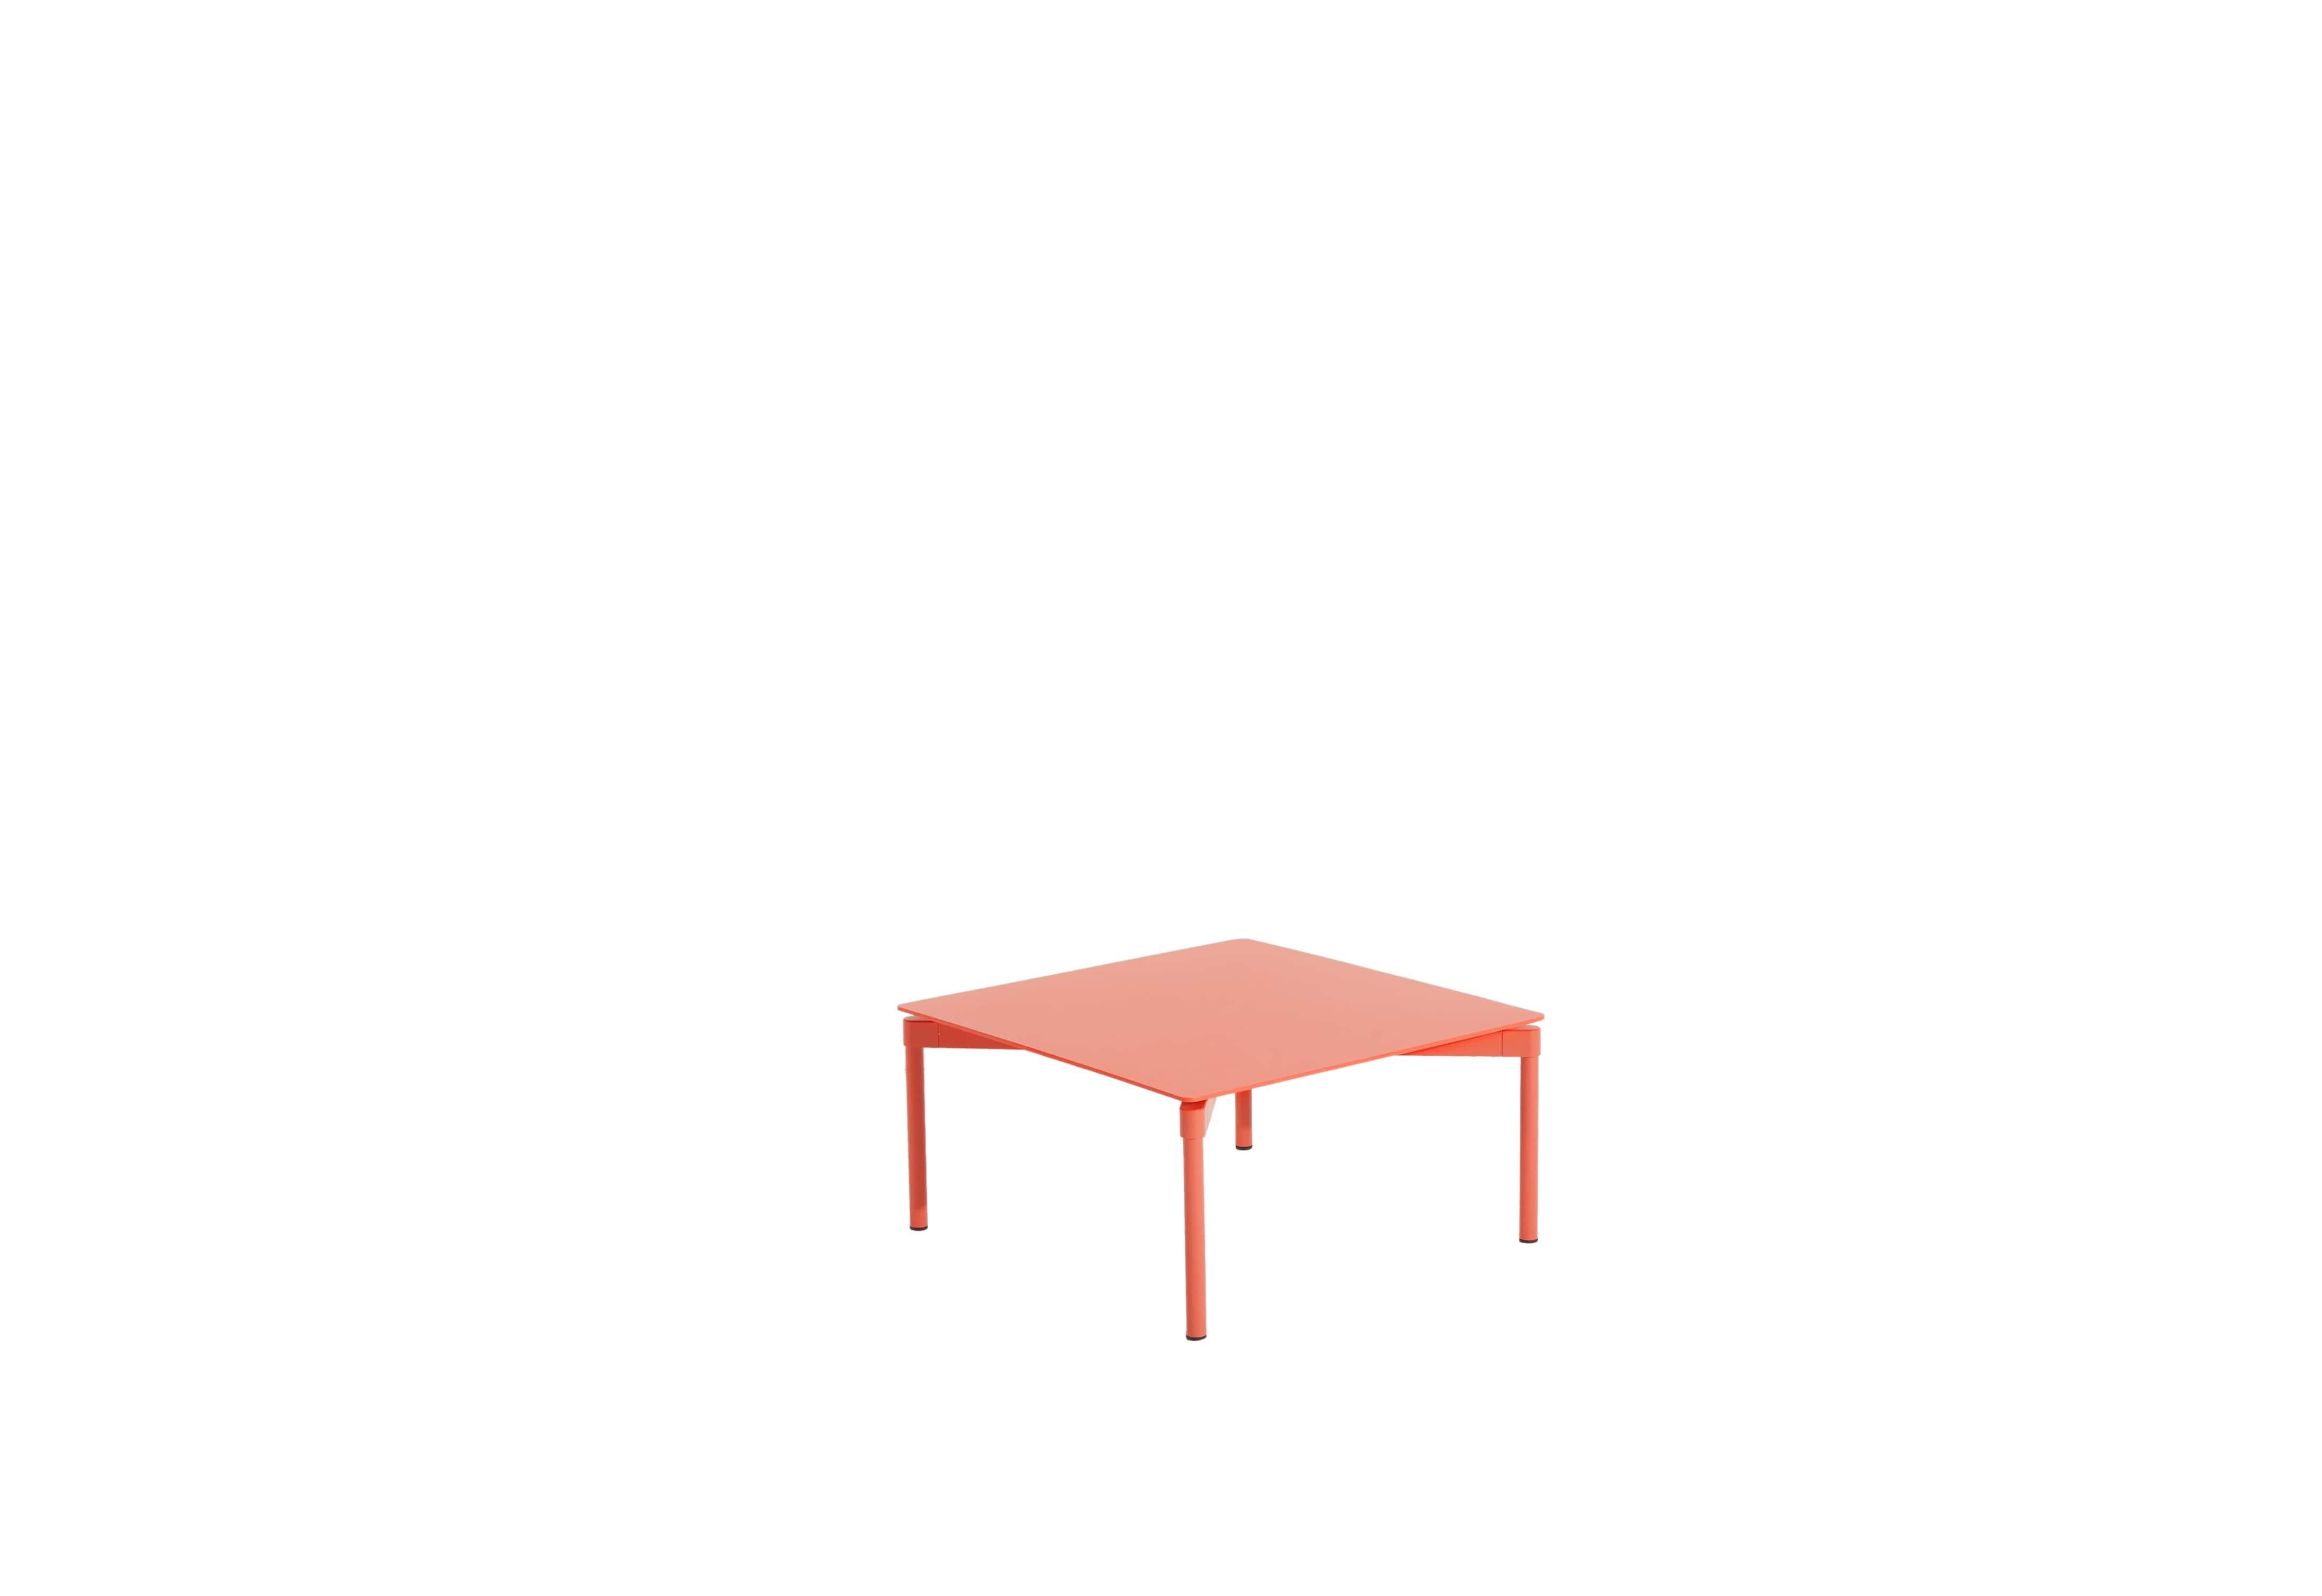 Petite Friture Fromme Coffee Table in Coral Aluminium by Tom Chung, 2020

The Fromme collection stands out by its pure line and compact design. Absorbers placed under the seating gives a soft and very comfortable flexibility to seats. Made from